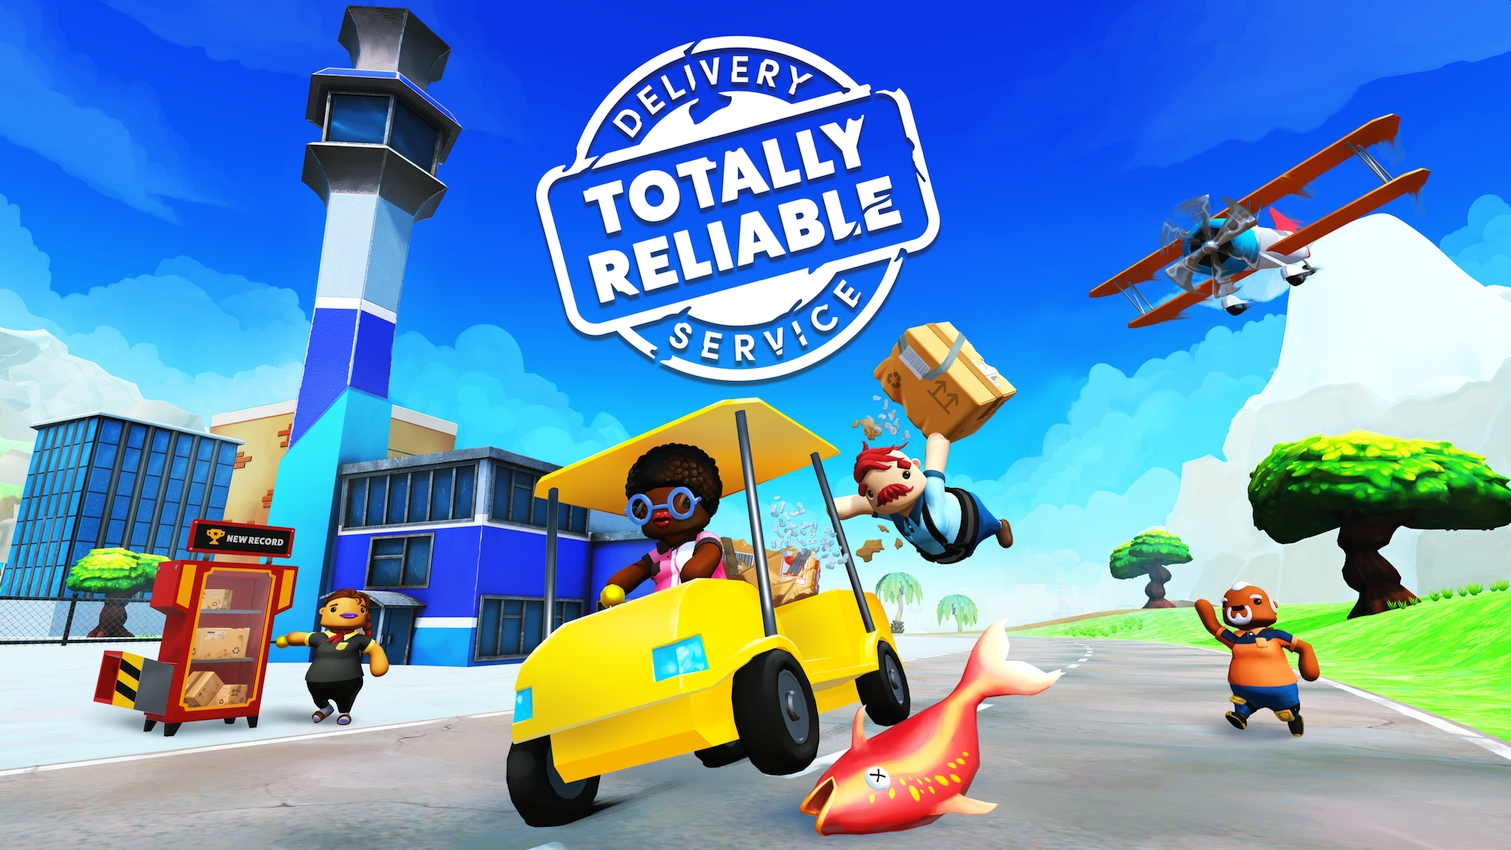 We’re Five Games’ Totally Reliable Delivery Service Launches This April